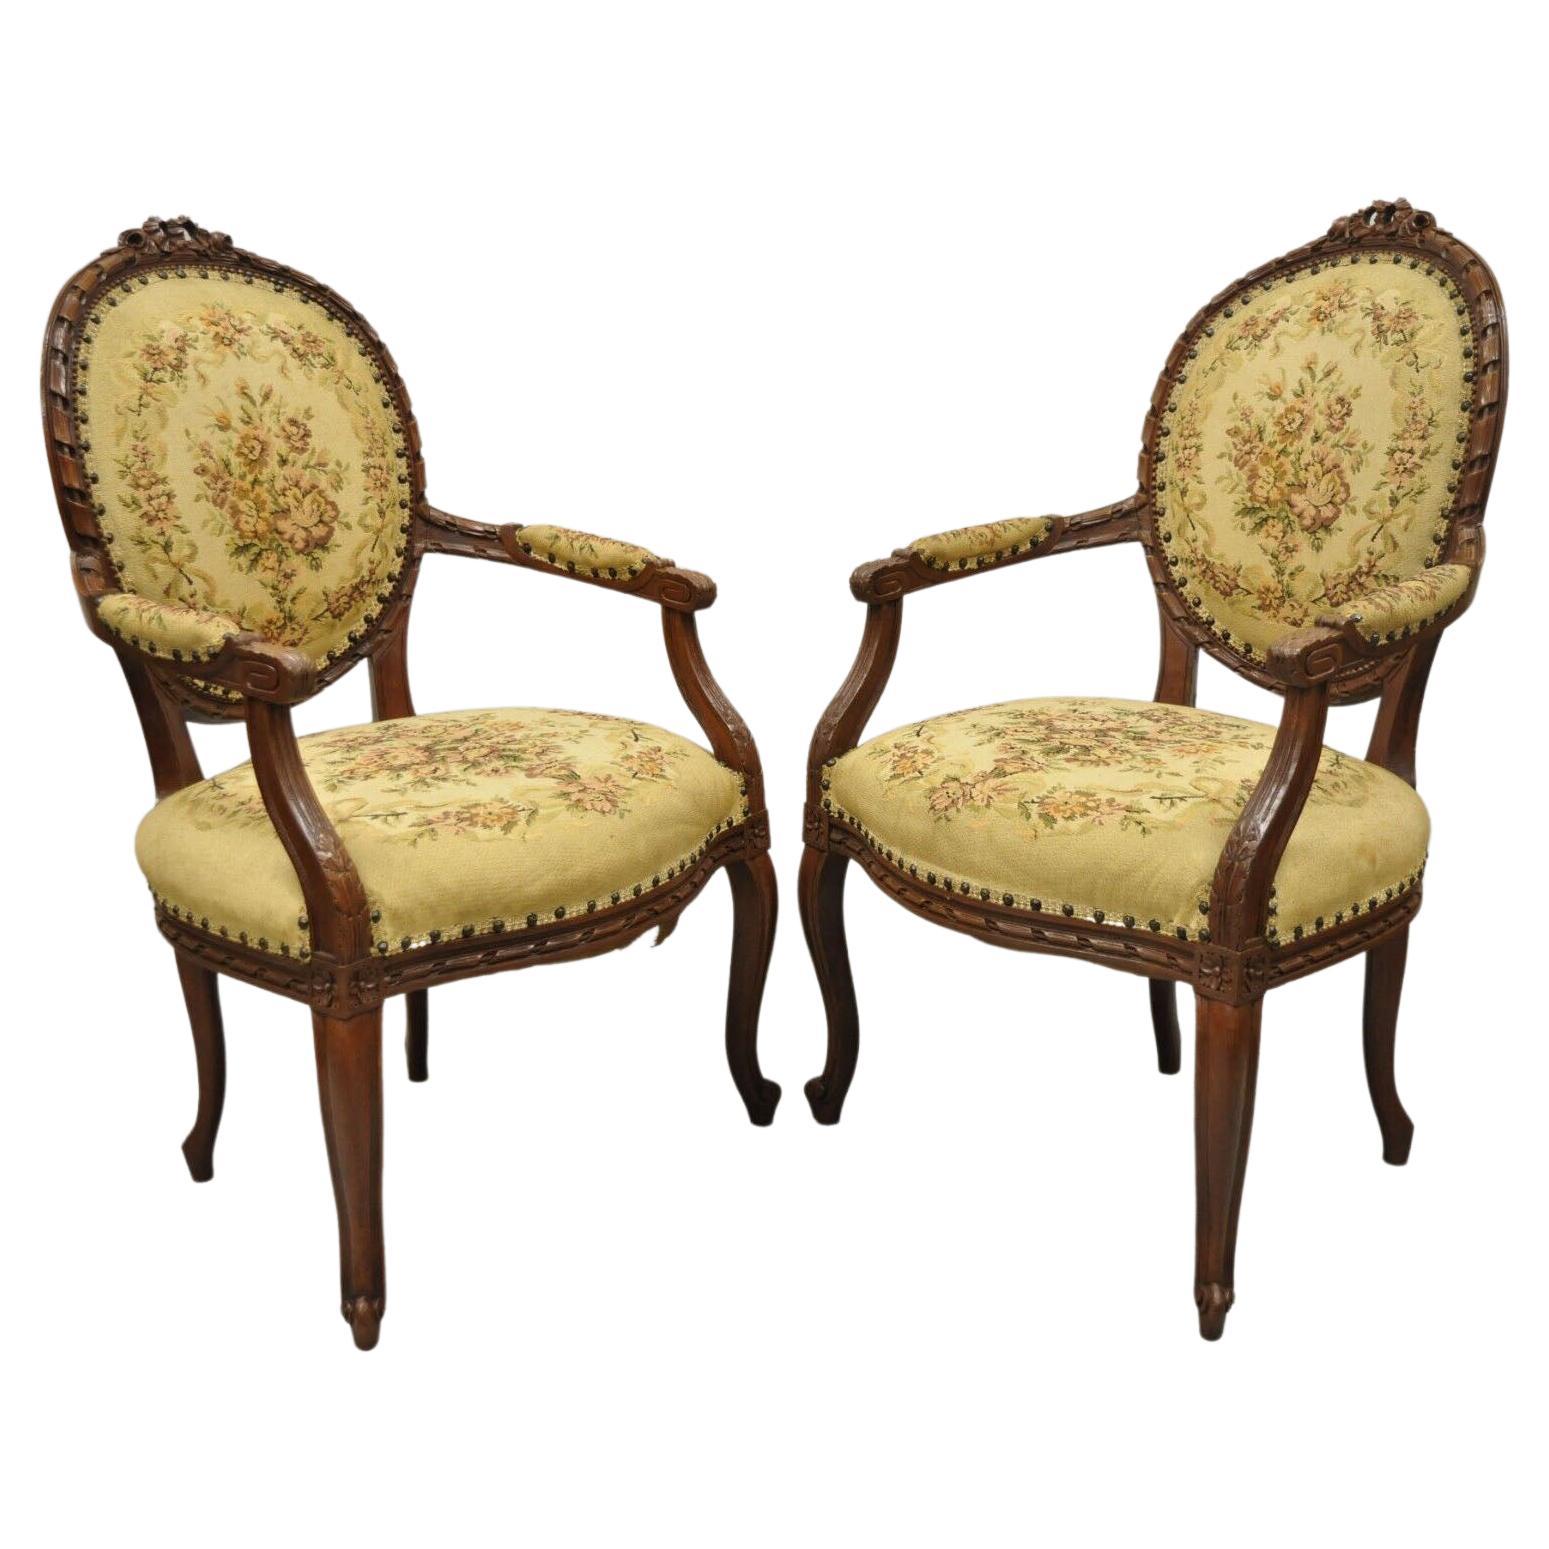 Antique French Country Louis XV Victorian Floral Tapestry Arm Chairs, a Pair For Sale